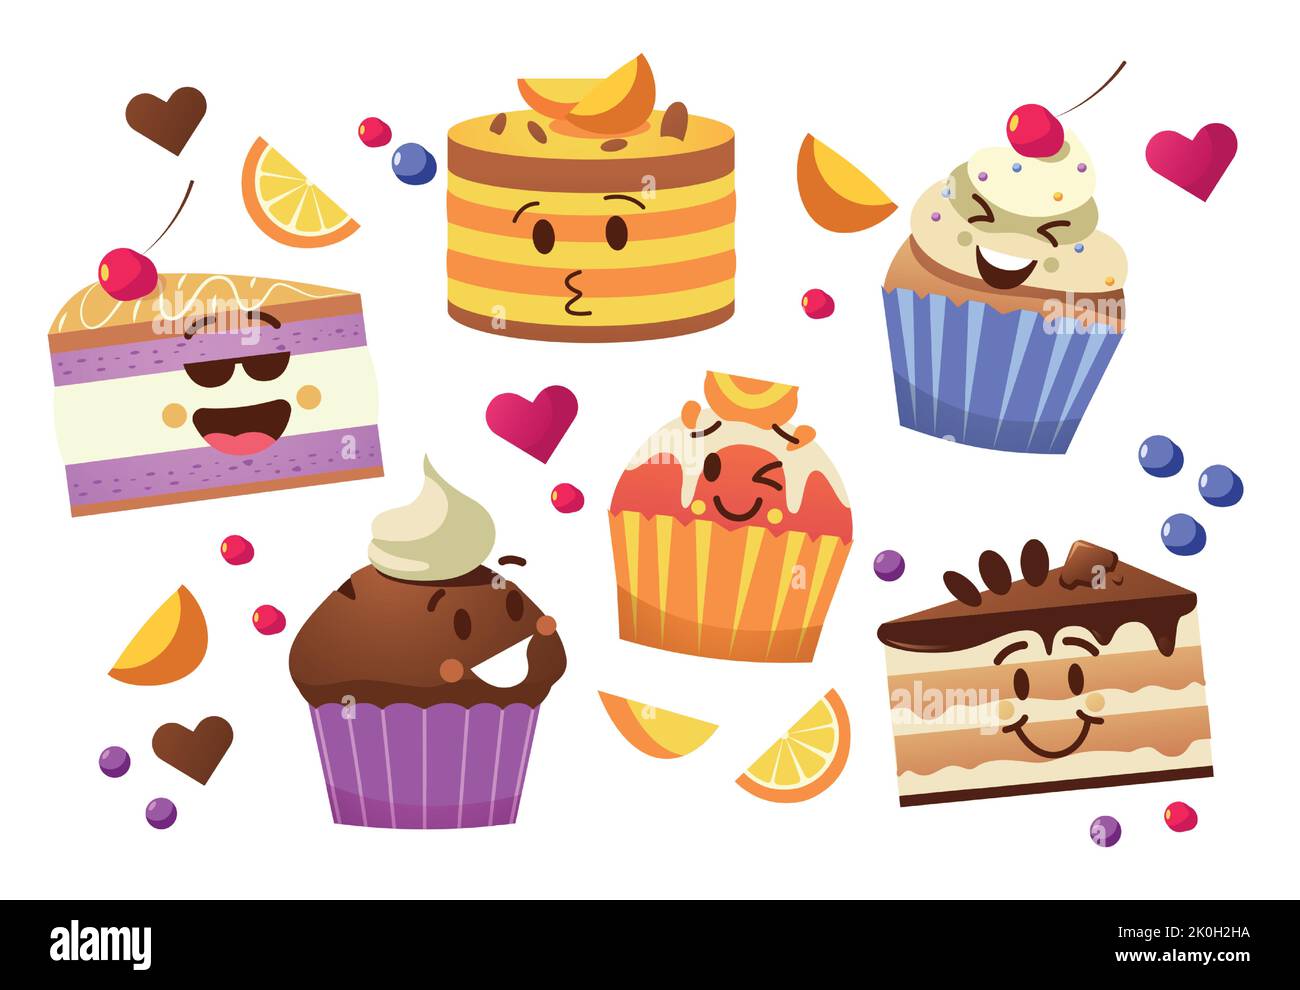 Cupcake characters. Kawaii cartoon muffins, sweet cake mascots with cute emoticon faces, tasty bakery food funny stickers. Vector pastry set Stock Vector